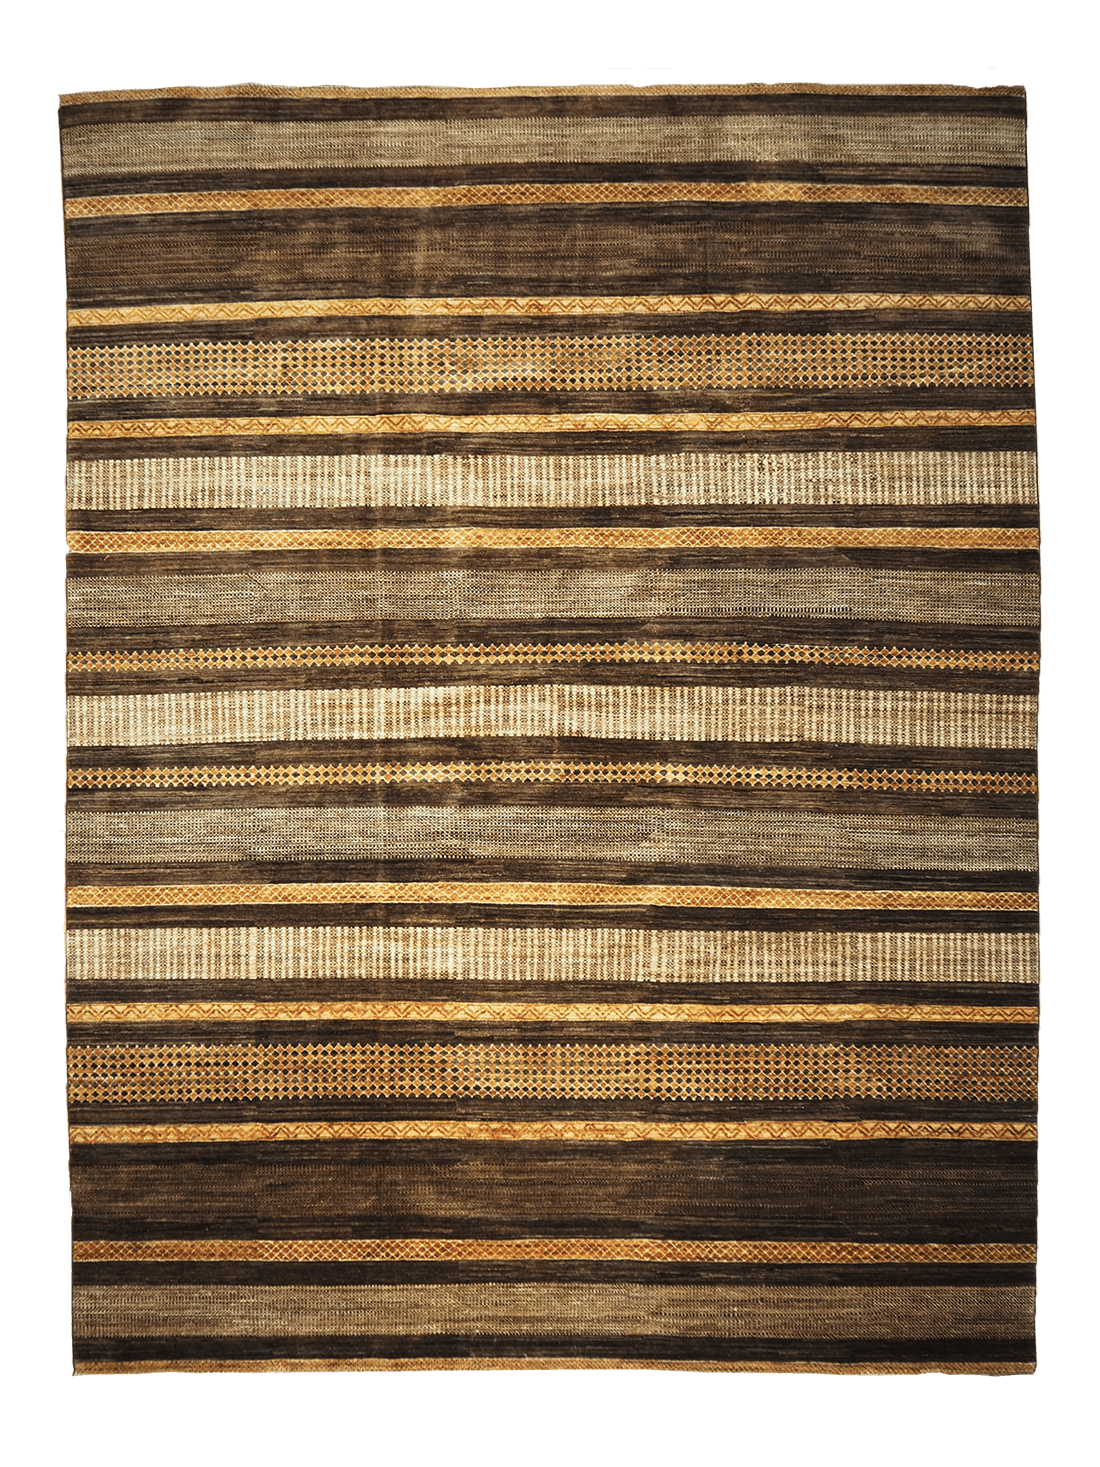 Authentic oriental rug with a striped design in brown